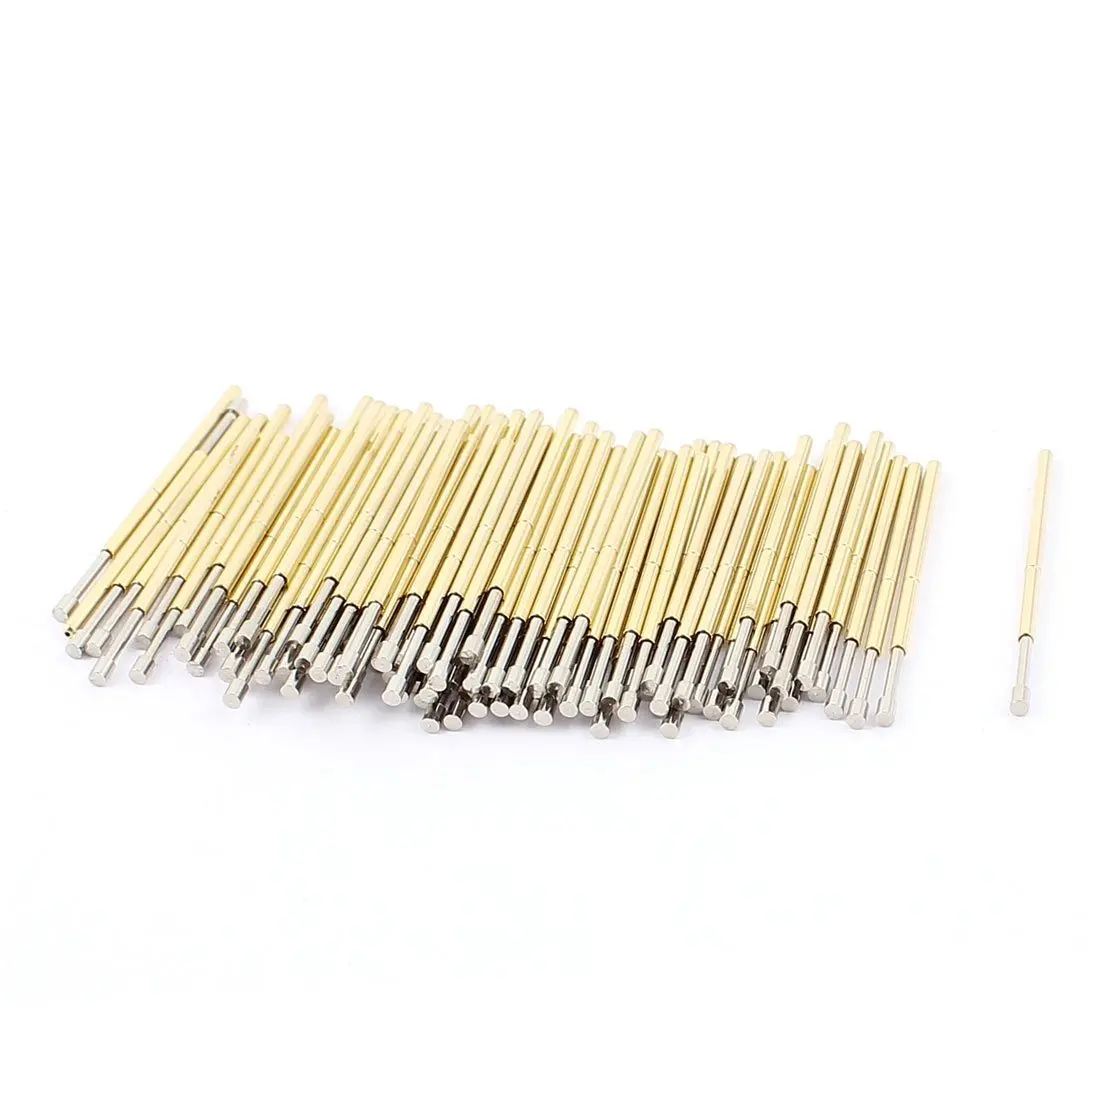 uxcell P125B Spear Tip Spring Loaded Test Probe Pin 33mm Length 60Pcs